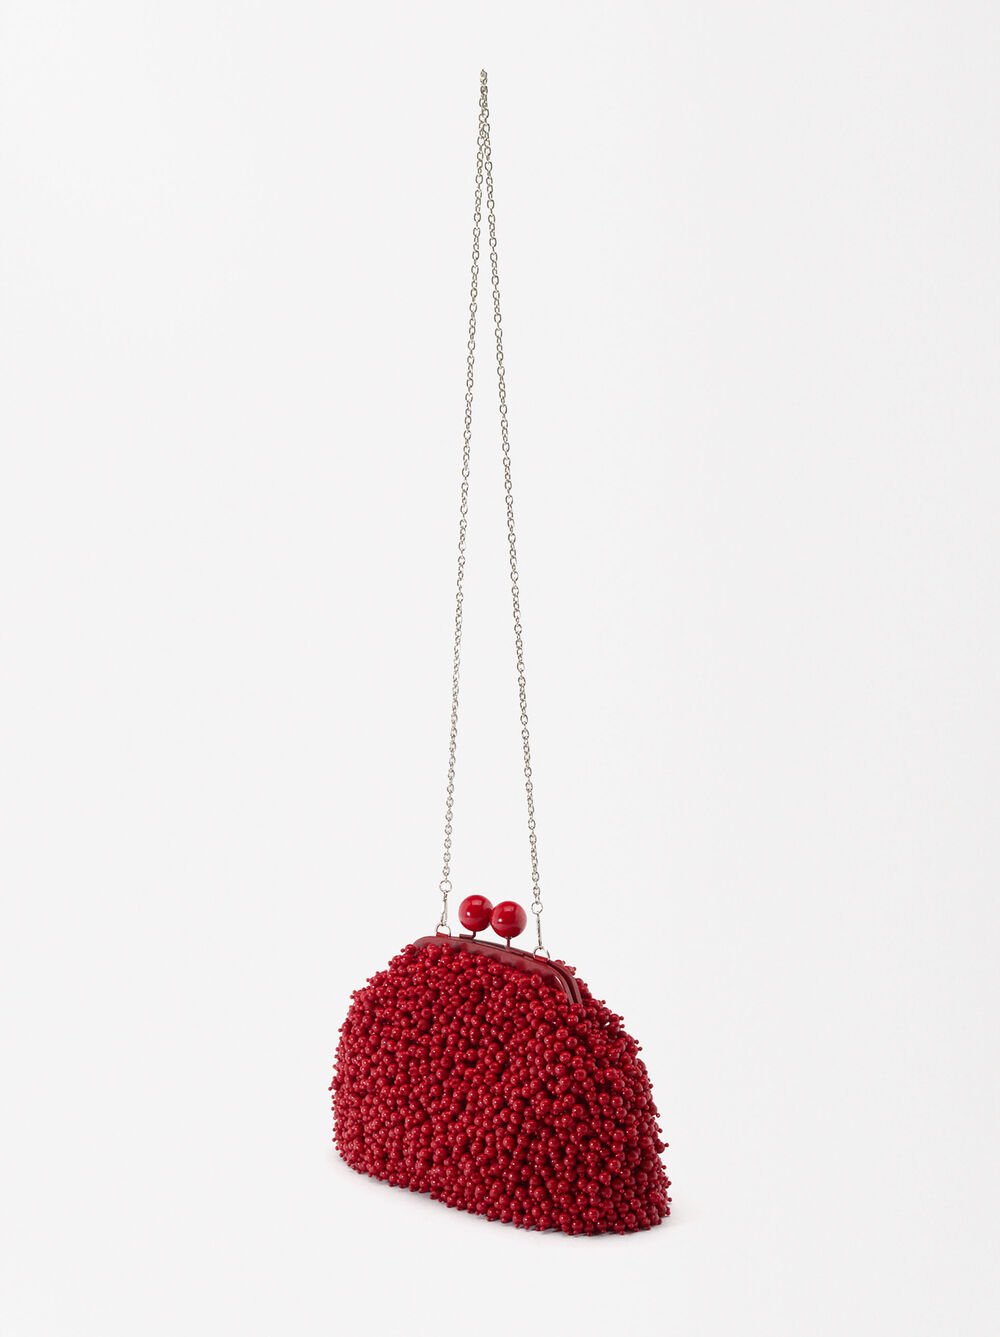 Party Handbag With Beads - Online Exclusive